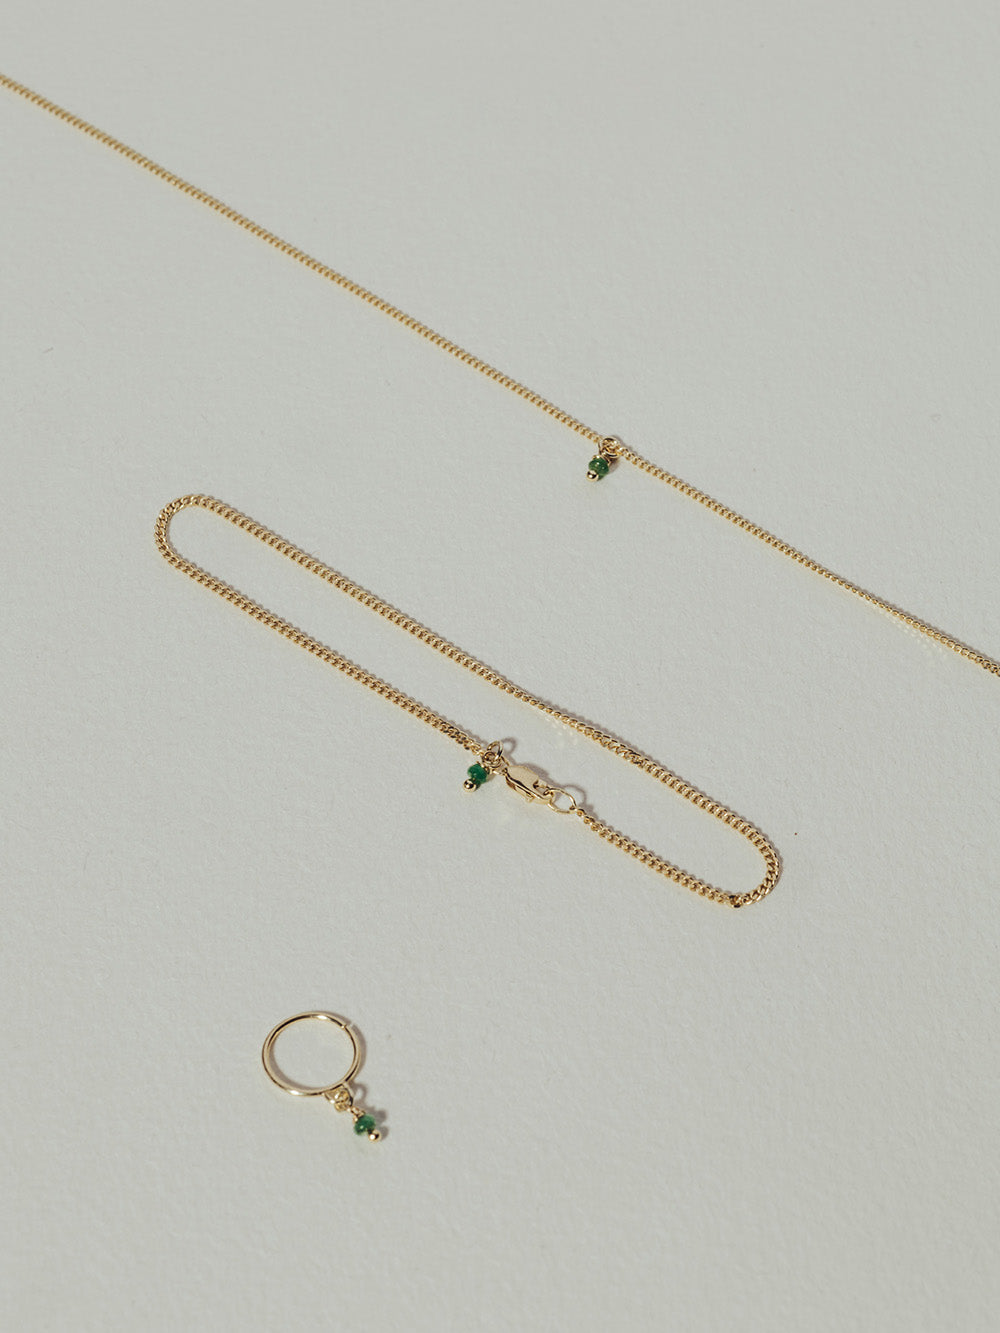 Birthstone May - Emerald | 14K Solid Gold